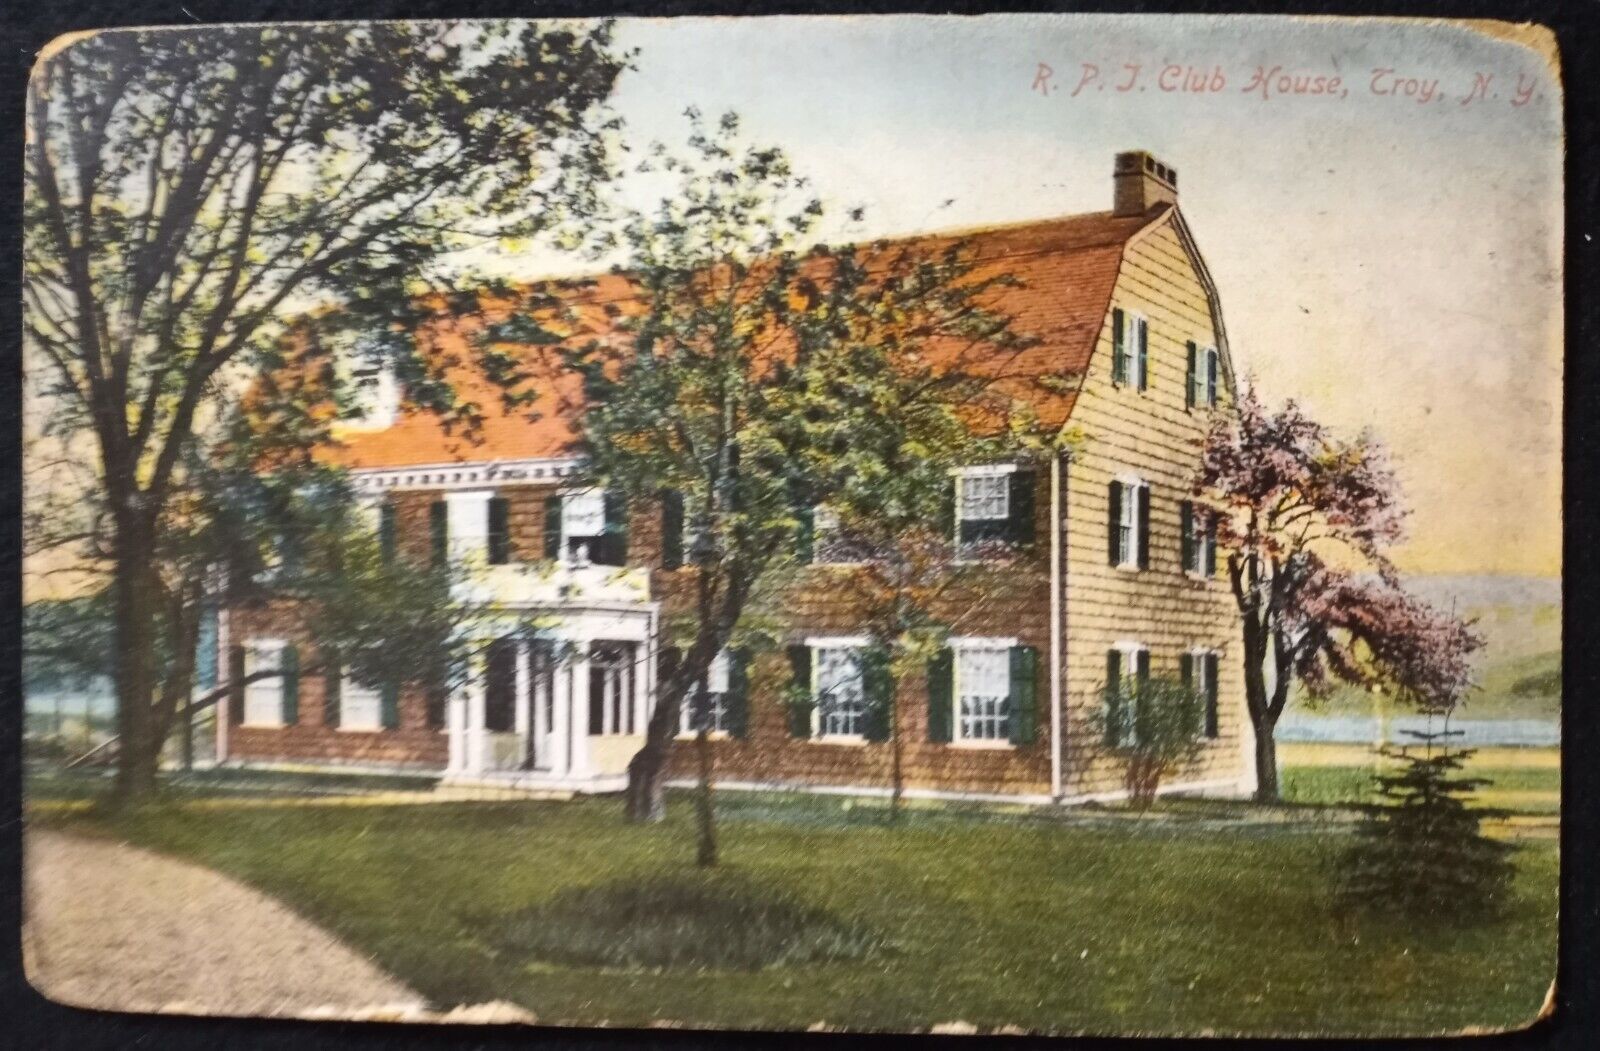 RPC Rensselaer Polytechnic Club House Troy New York NY 1911 c1910s Postcard A10